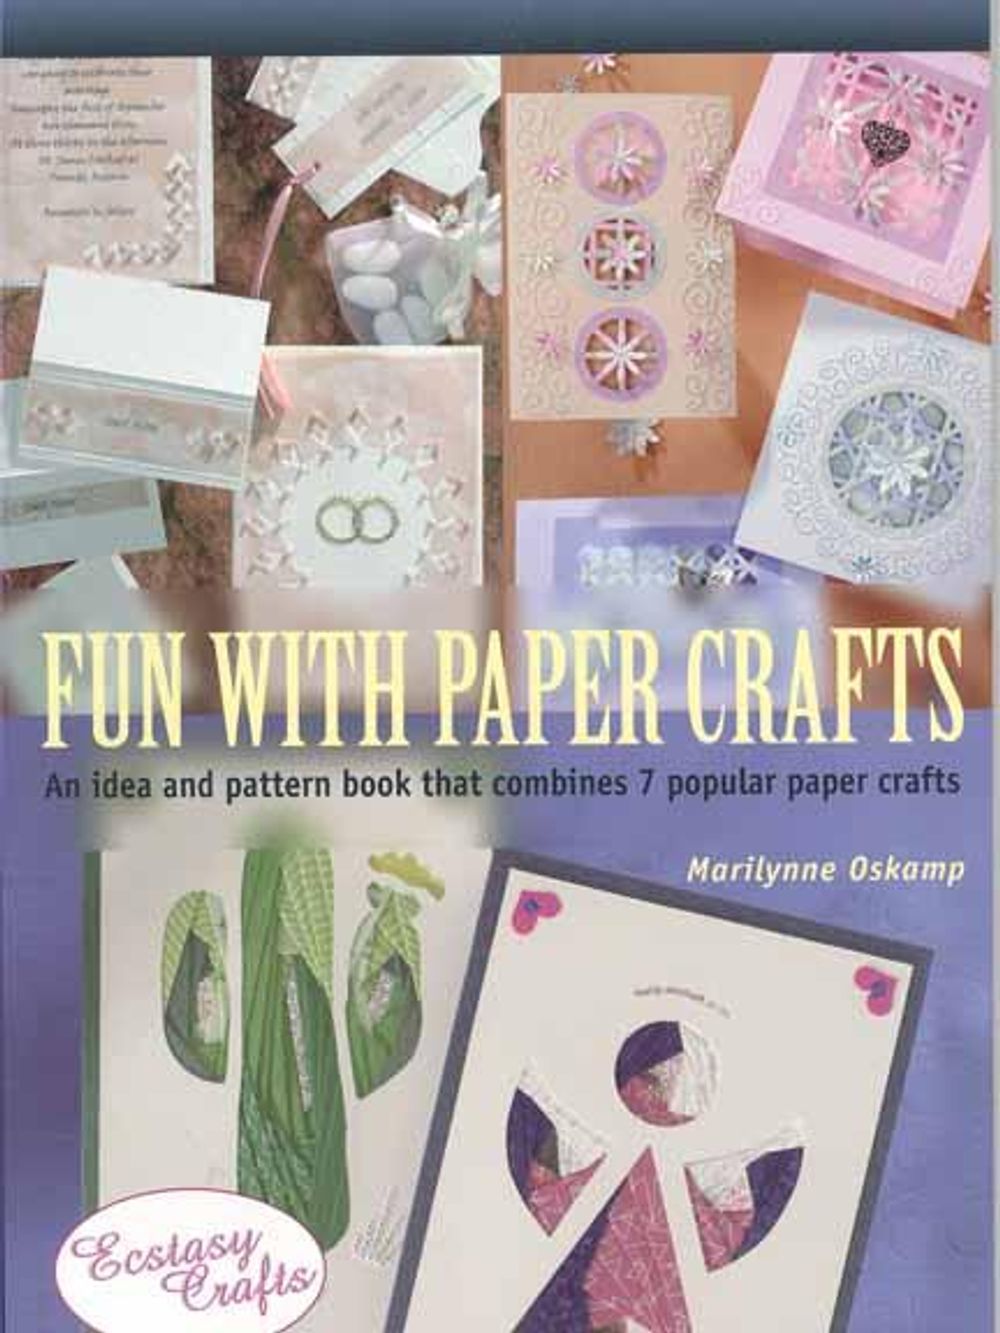 Welcome to Search Press for all your art book, craft book and needlecraft  book needs. Cardmaking, Papercraft, Scrapbooking, Quilling, Rubber  stamping, Tea bag folding, Parchment craft, Craft Design Sources, Crafters  patterns, Crafters